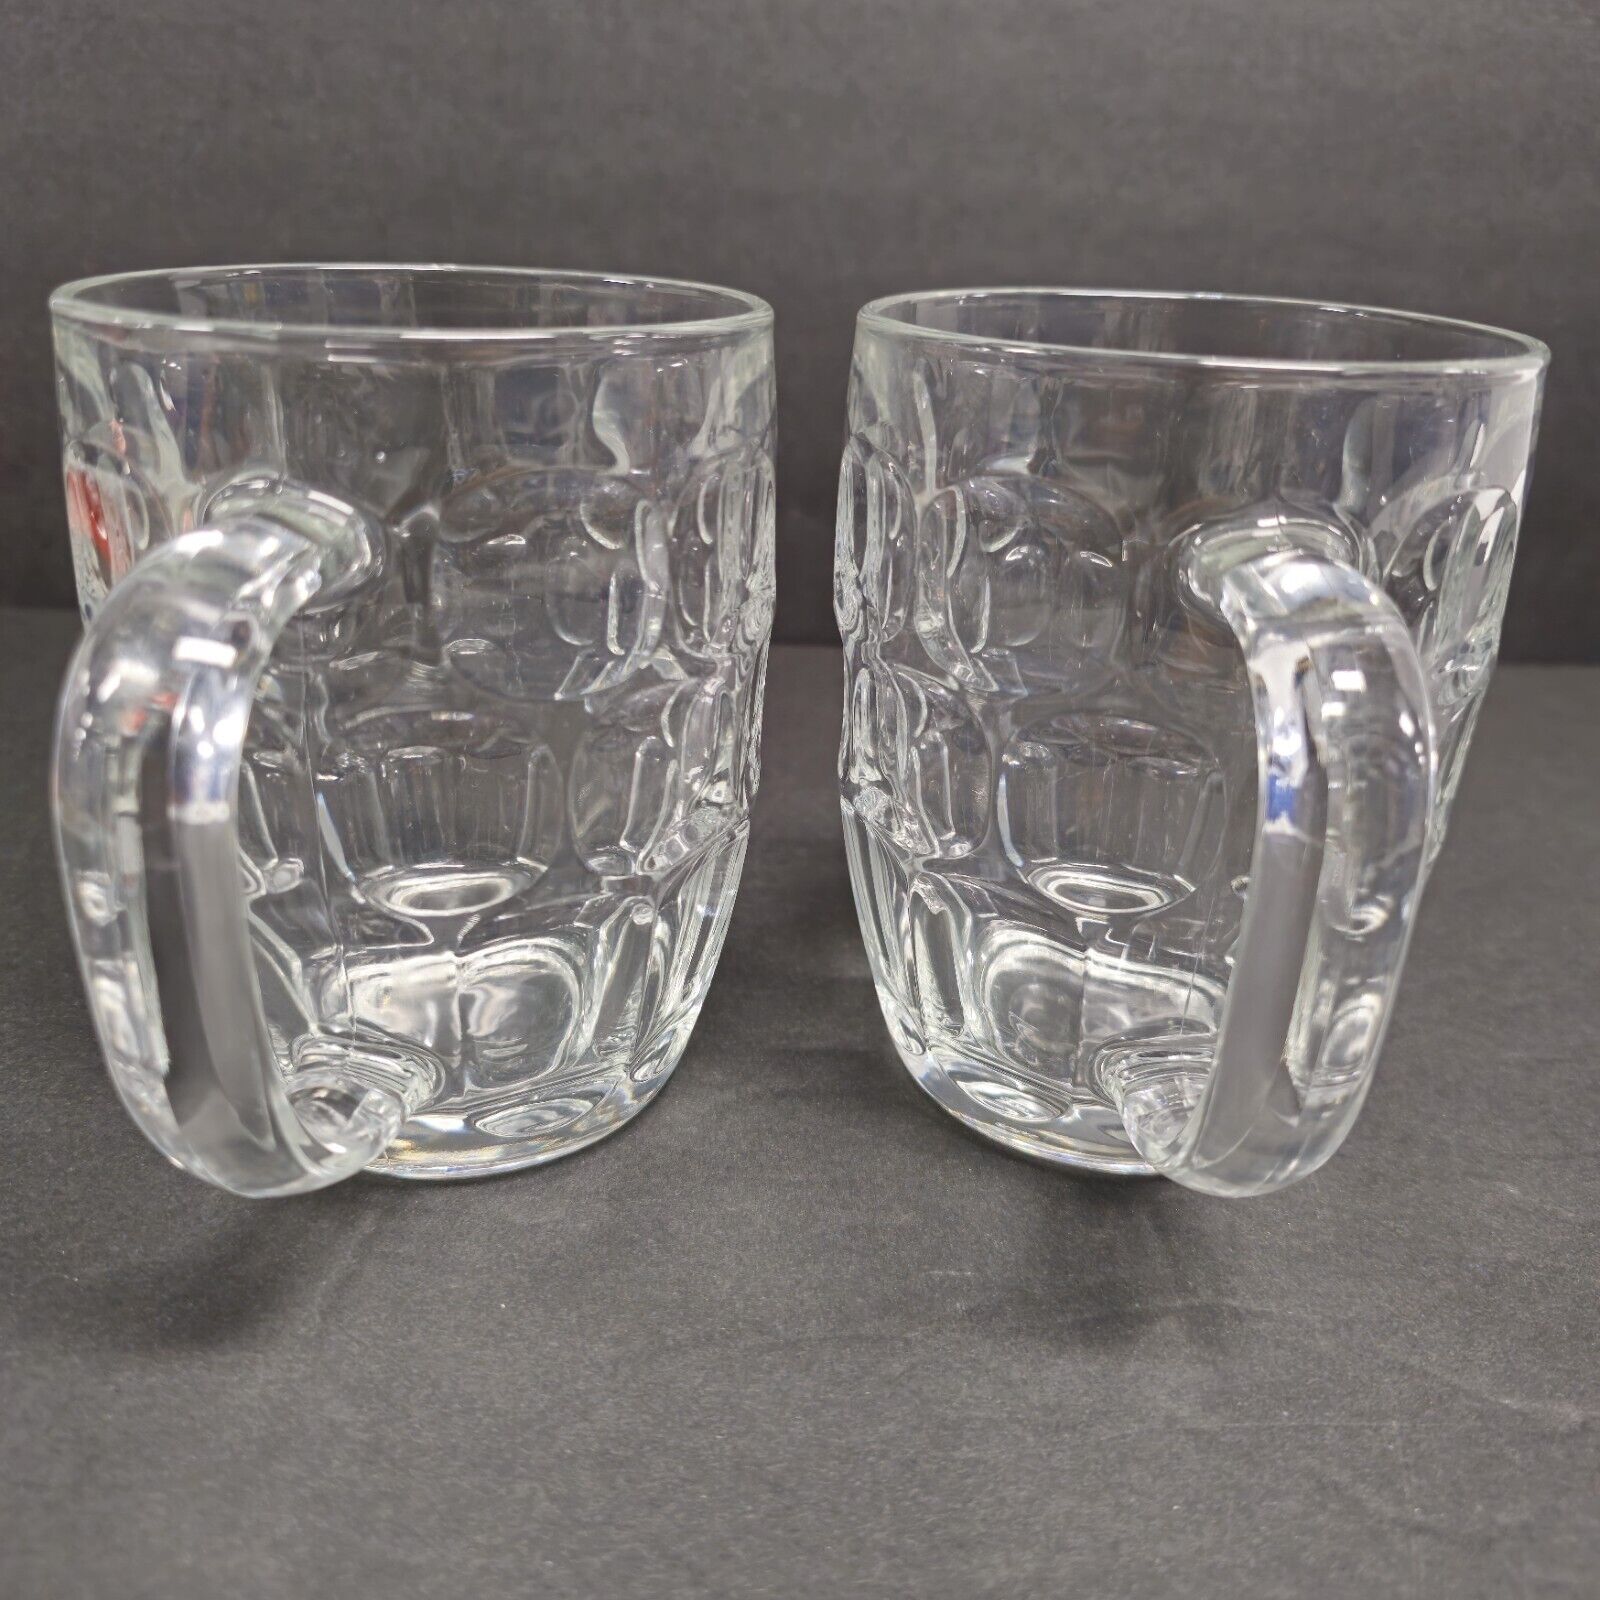 Luminarc Barrel Thumbprint Dimple Clear Glass Beer Mugs USA Lot of 2 NO Chips